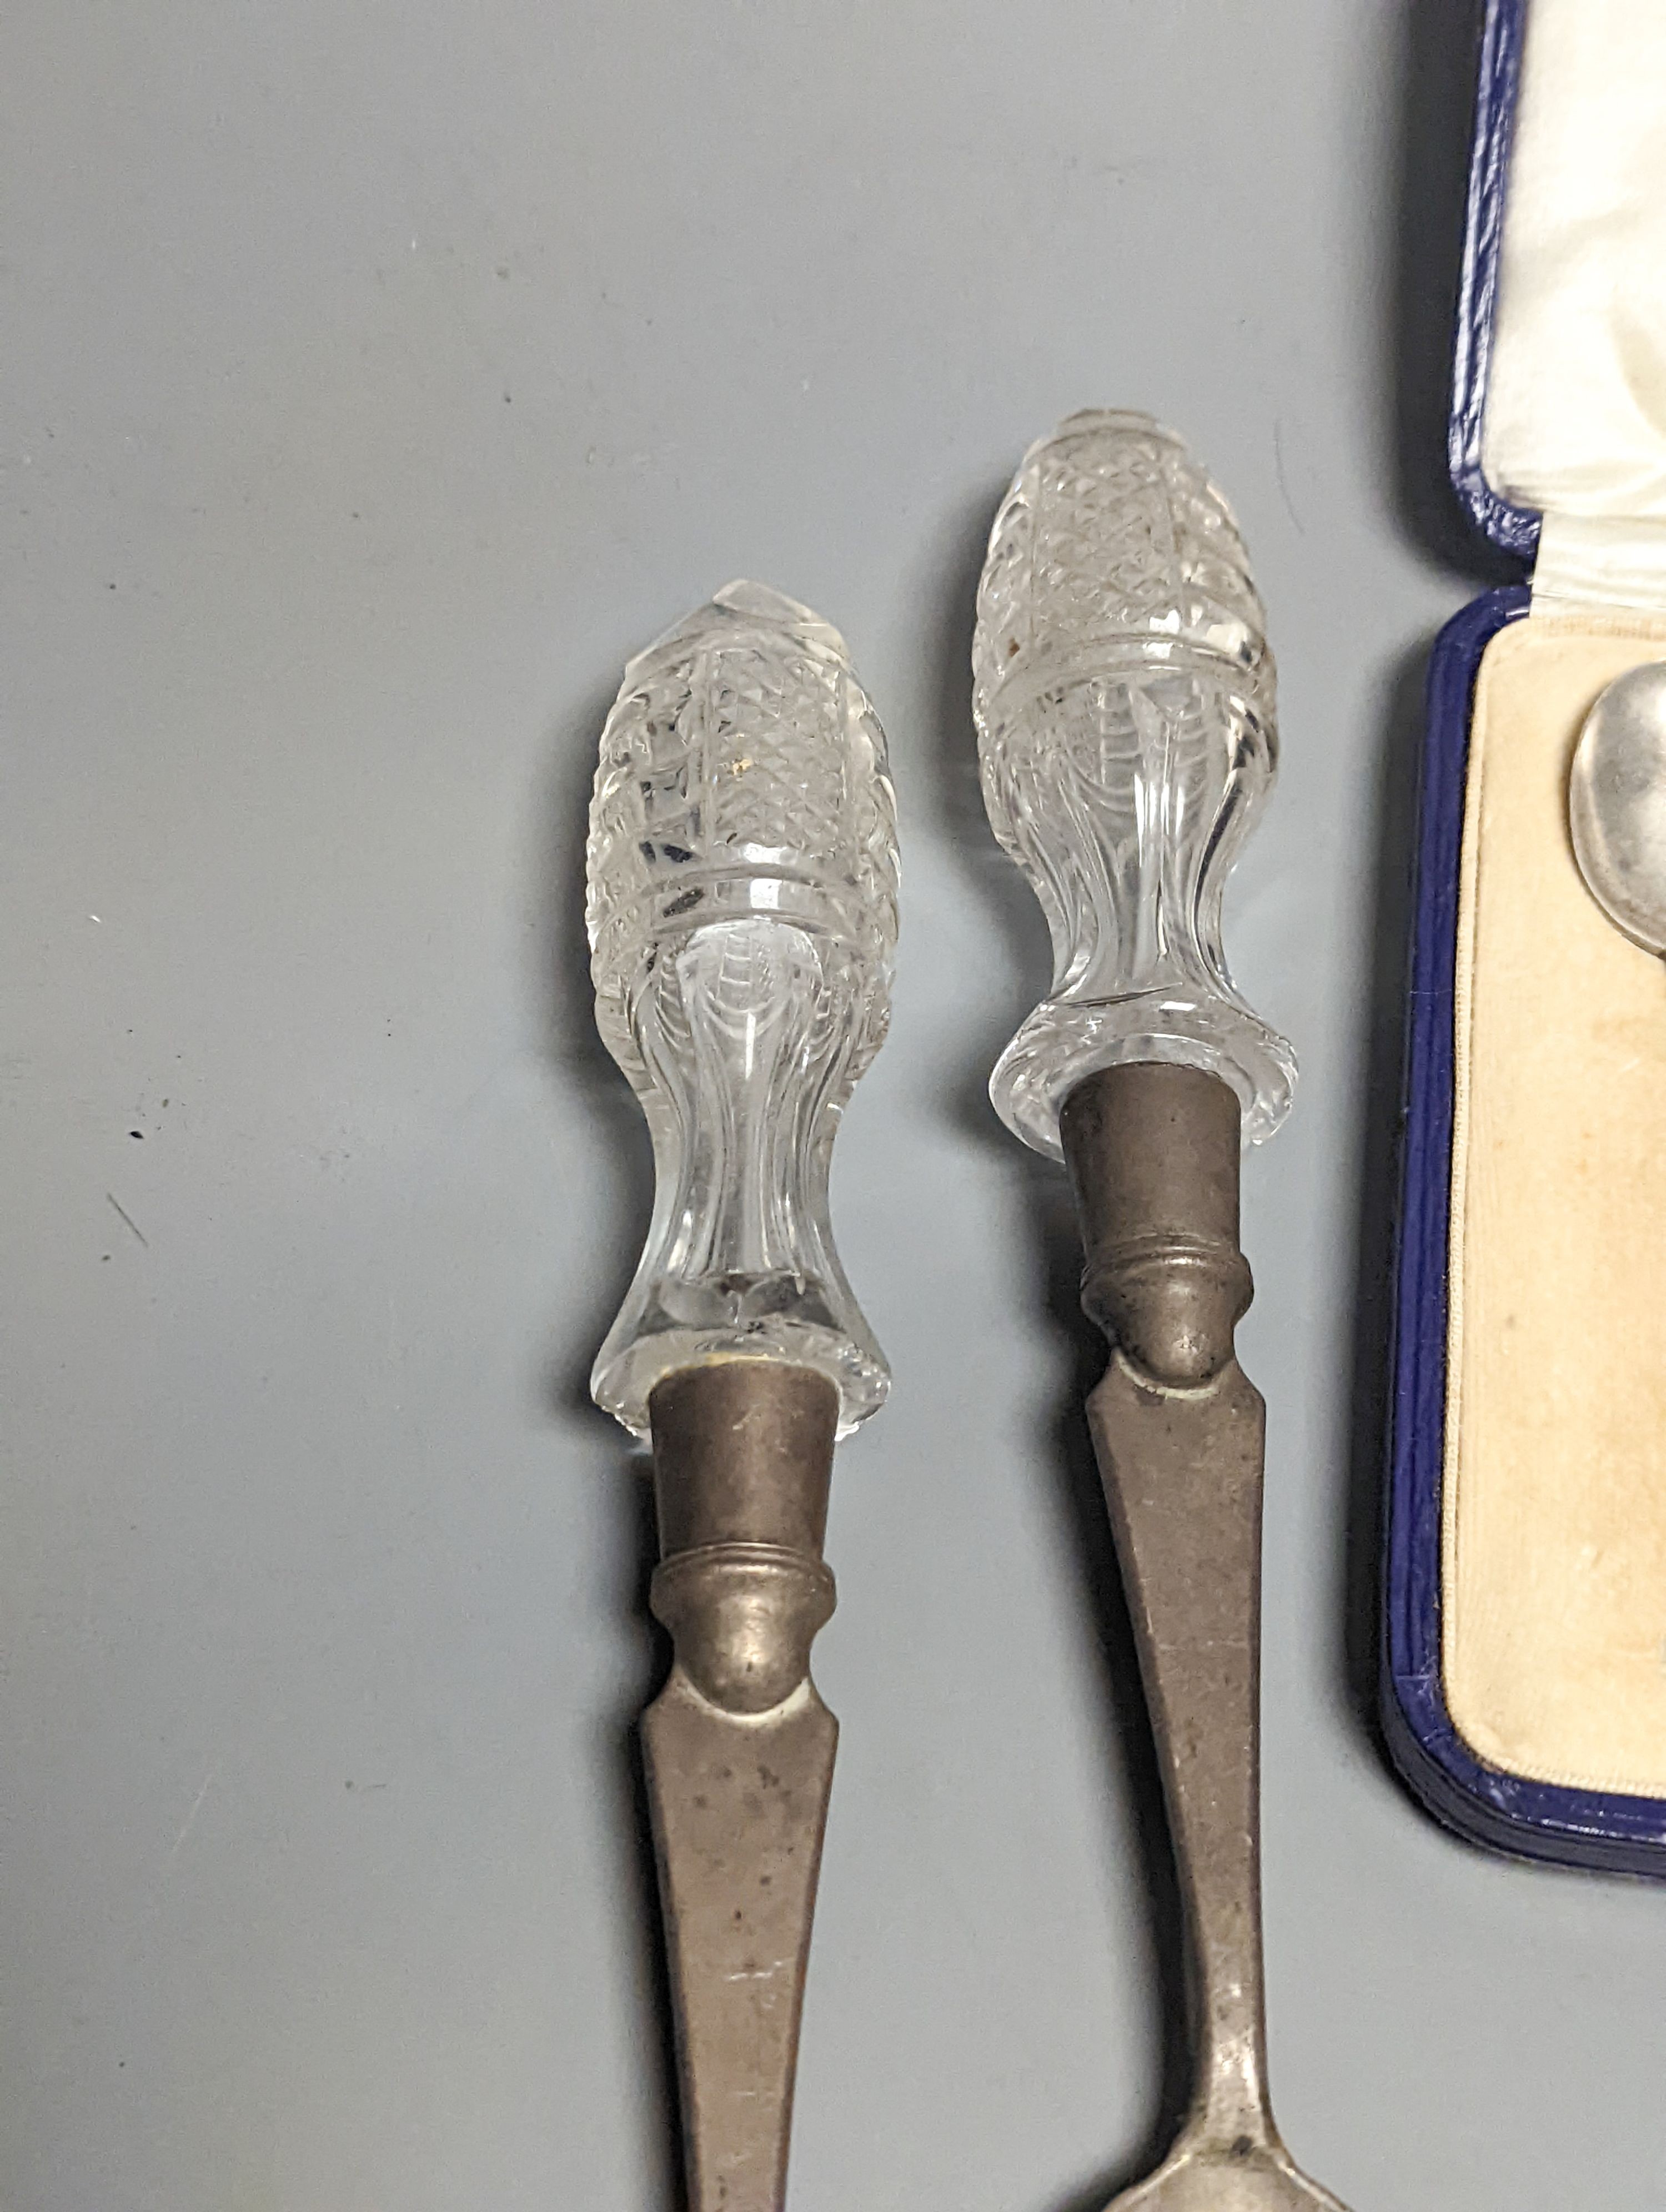 A pair of Edwardian glass handled silver salad servers, William Hutton & Sons, London, 1902, 26.8cm, a cased set of six silver teaspoons, a silver toastrack and a silver ashtray.